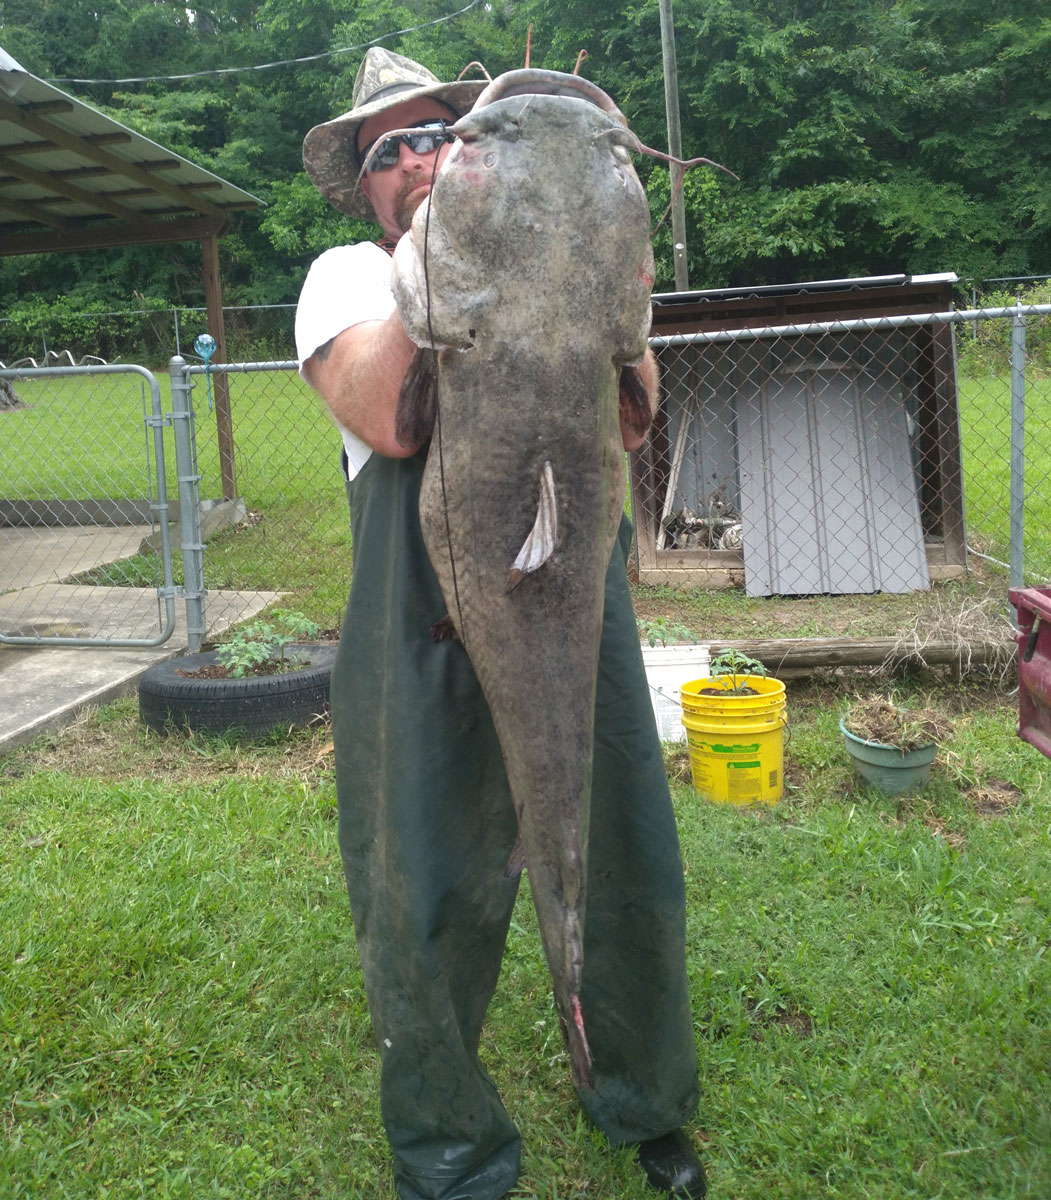 J.R. Watson of Converse caughtthis 72-pound catfish on a trotline he’d strung near his house on Toledo Bend Reservoir.